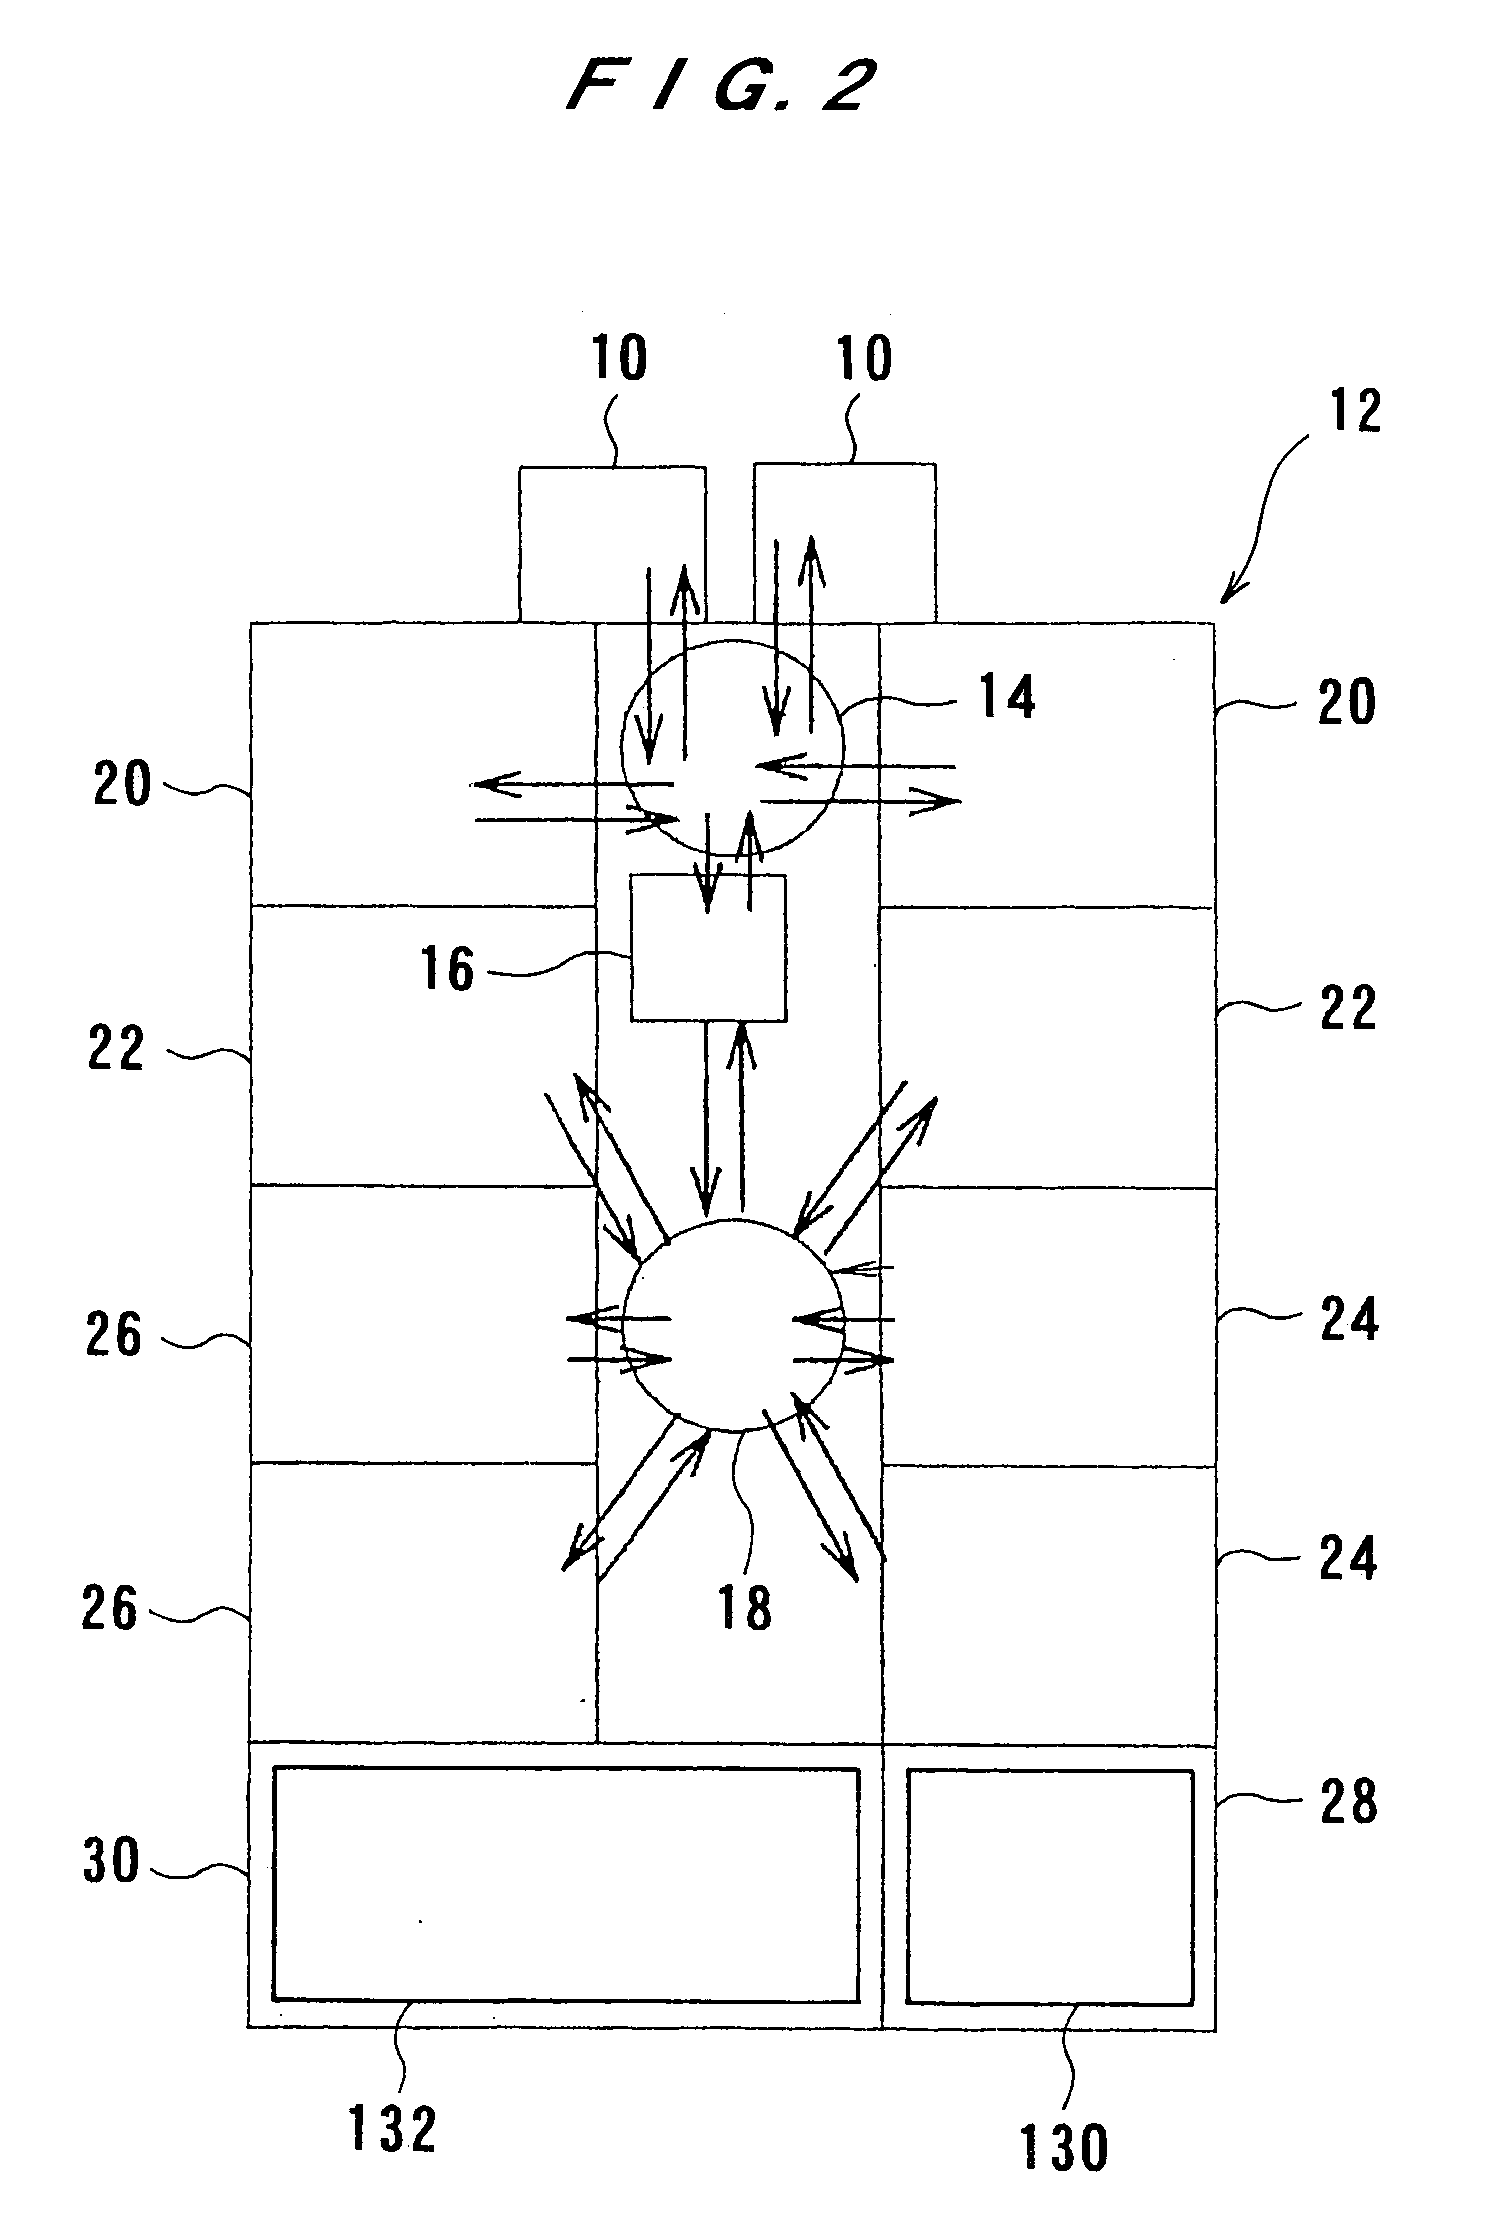 Substrate processing unit and substrate processing apparatus